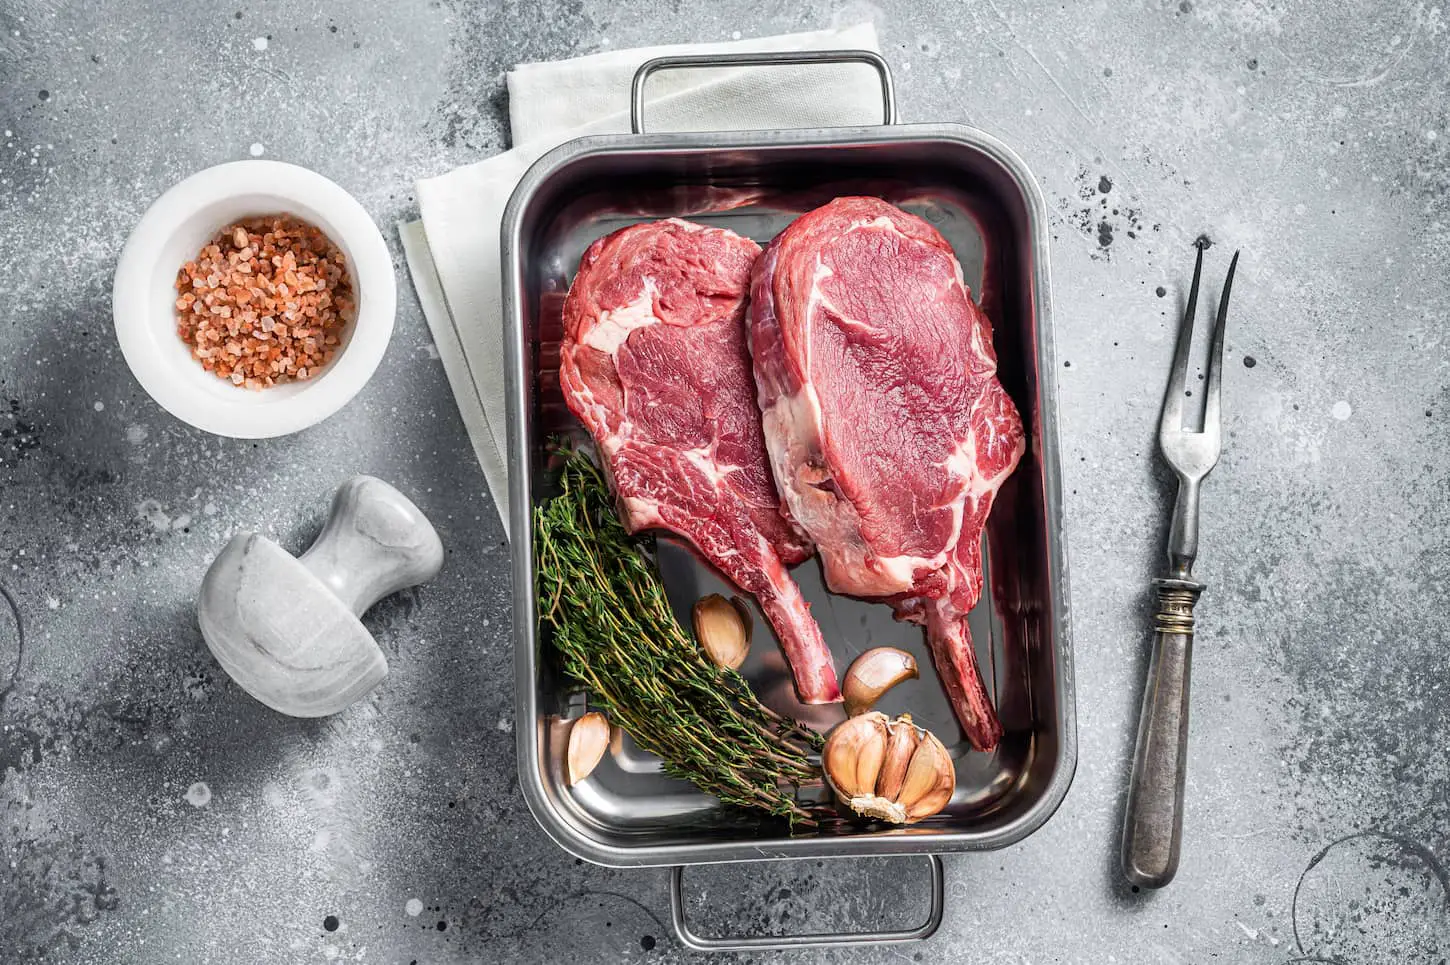 An image of uncooked Raw Tomahawk veal steaks in a steel tray with herbs with a gray background.